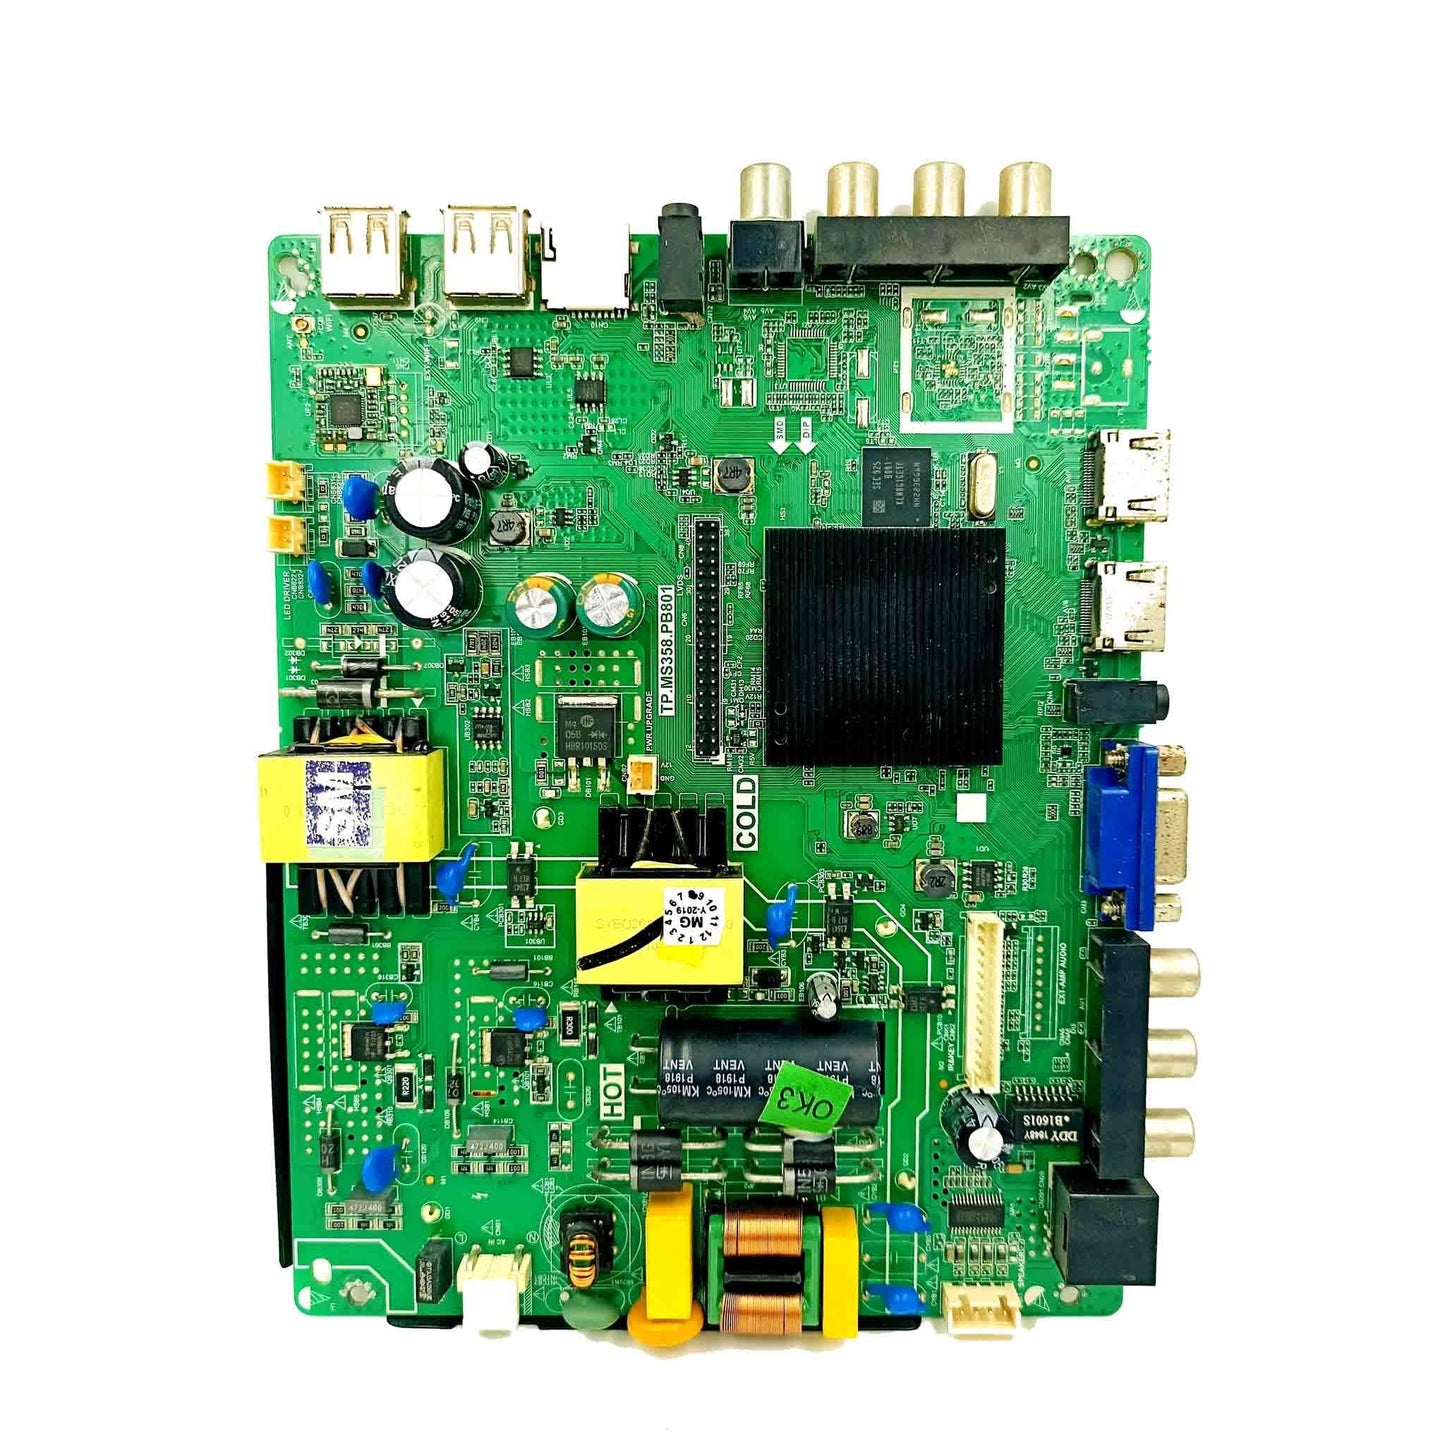 Mother board Suitable for DN-4201-SM CHINA LED TV - Faritha